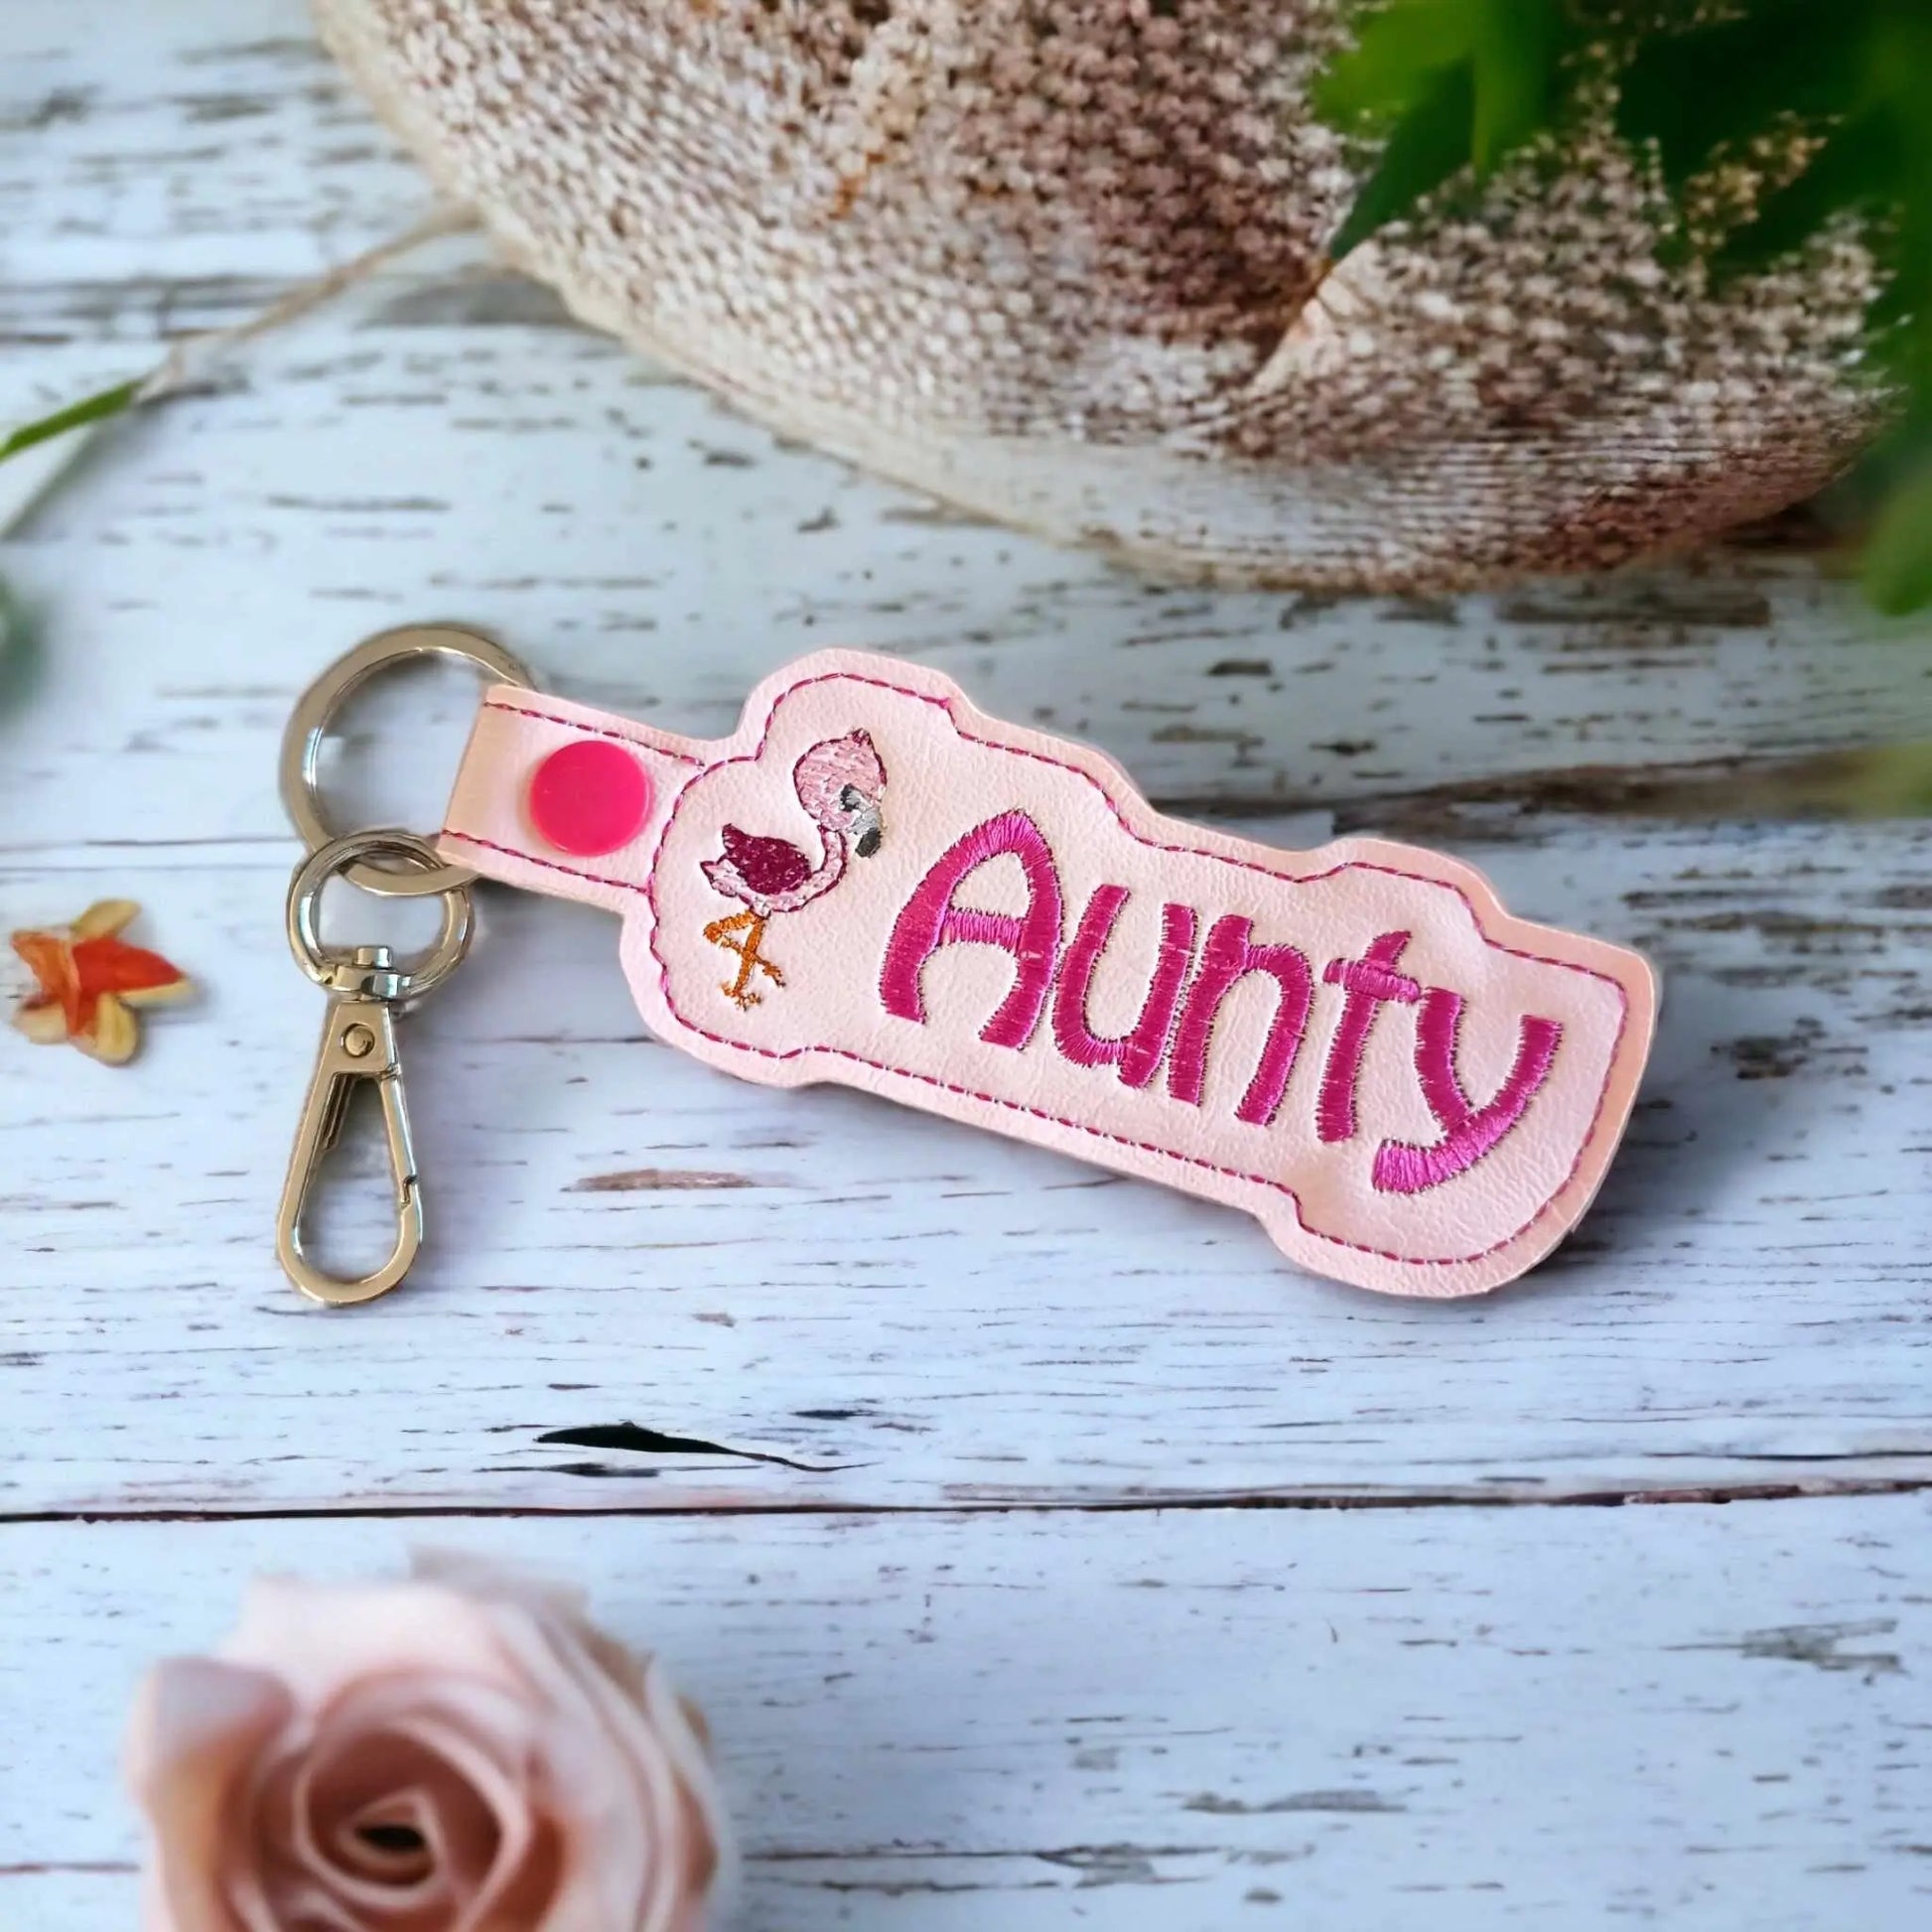 Unique Aunty Flamingo Themed Pink Keychain keyring - made in Australia